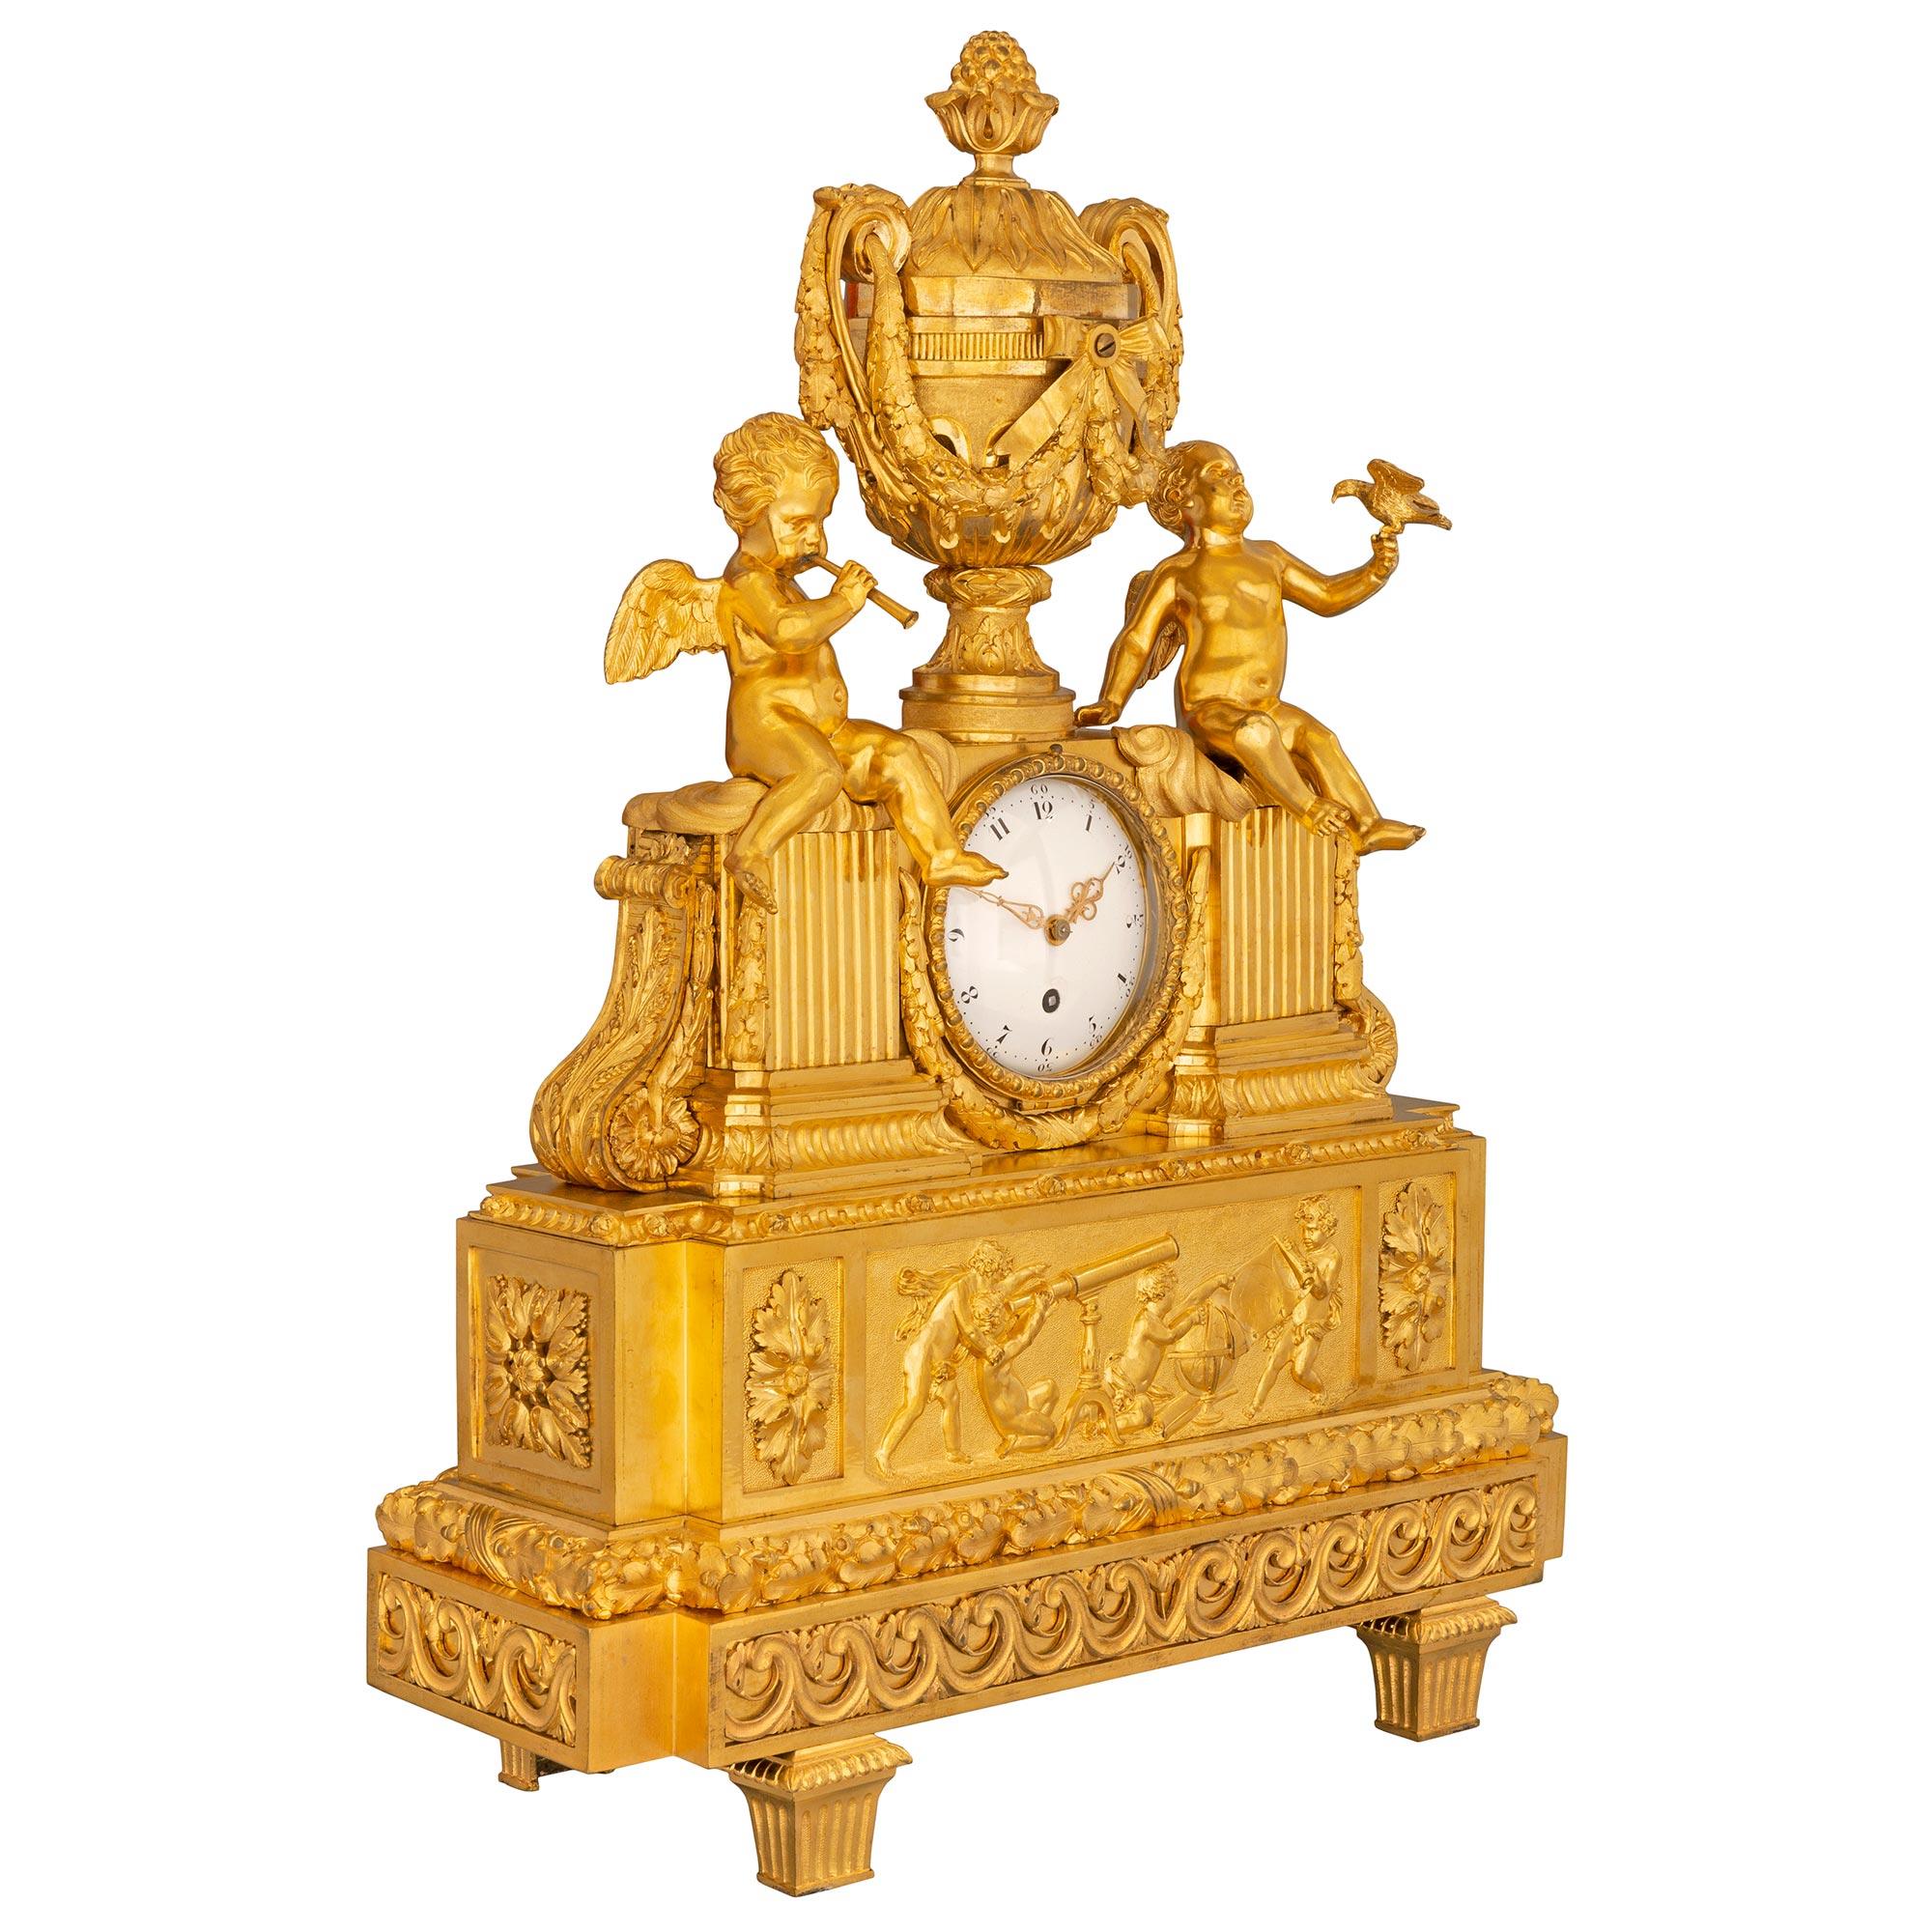 An exquisite French 19th century Louis XVI st. Belle Époque period ormolu clock. The clock is raised by elegant block feet with fine fluted and les oves designs. Impressive mirrored Vitruvian scrolls extend along the straight apron below an